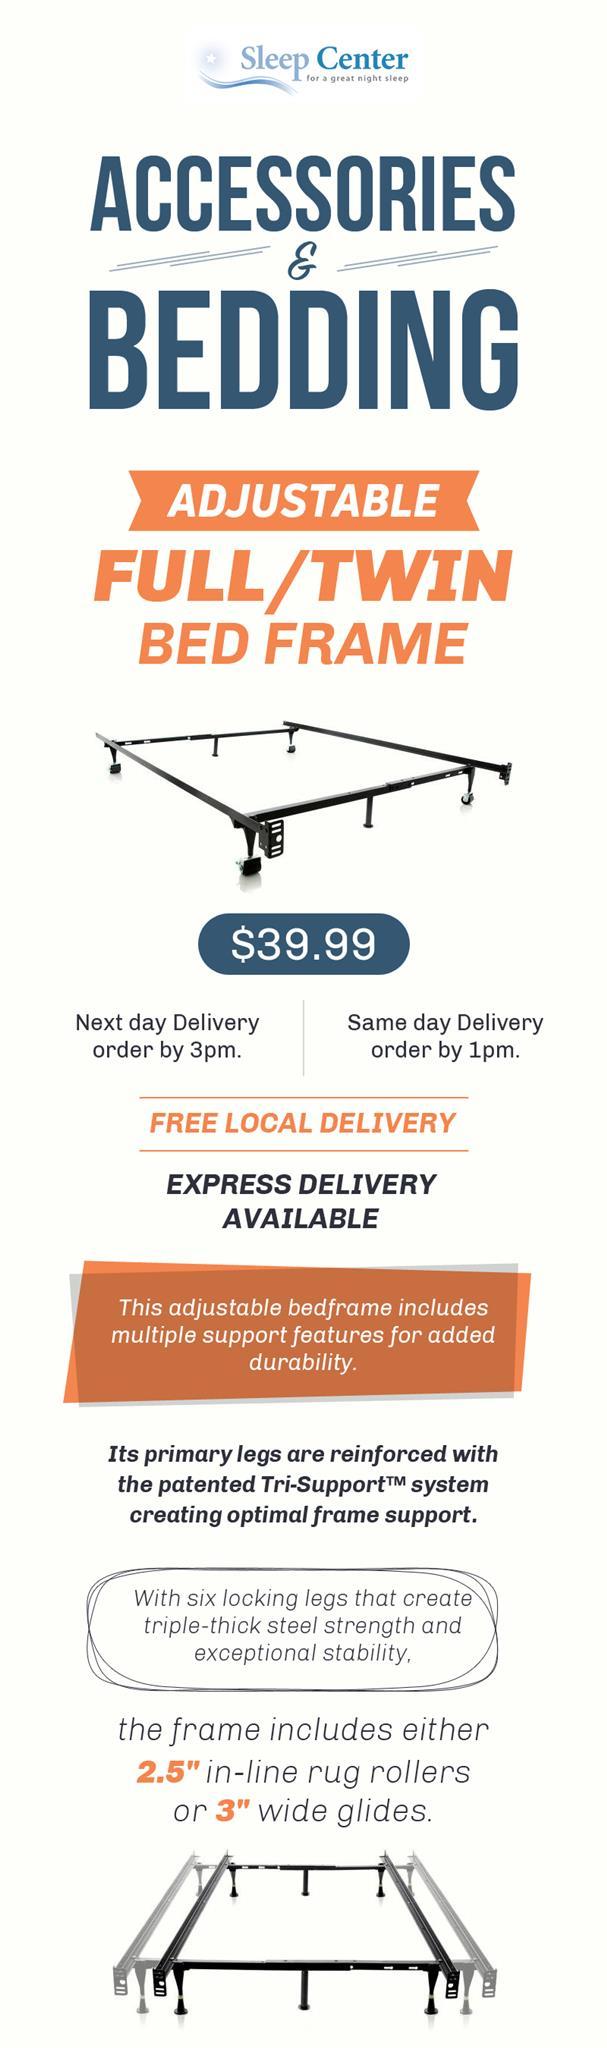 Purchase Adjustable Full/Twin Bed Frame Online from Sleep Center